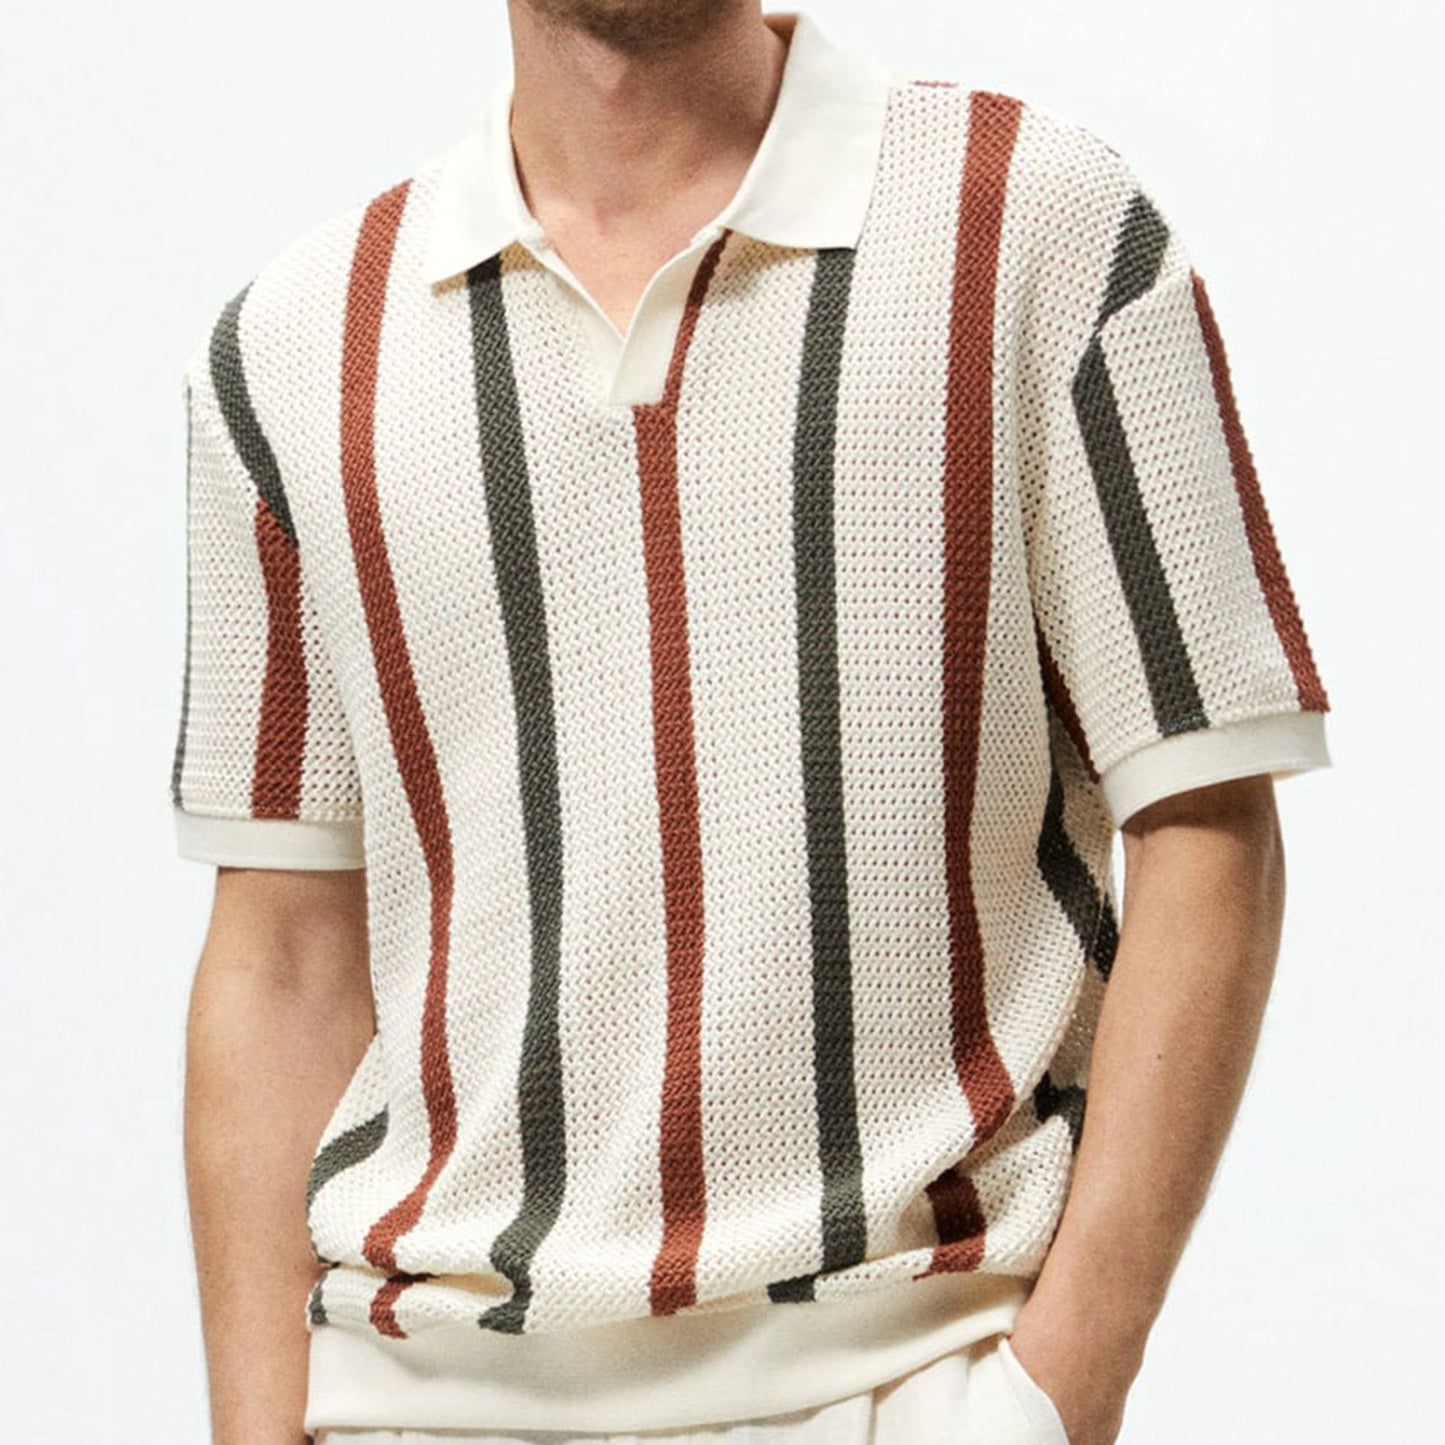 Thick needle hollowed out knit shirt with striped contrasting color woolen casual polo shirt as a Father's Day gift